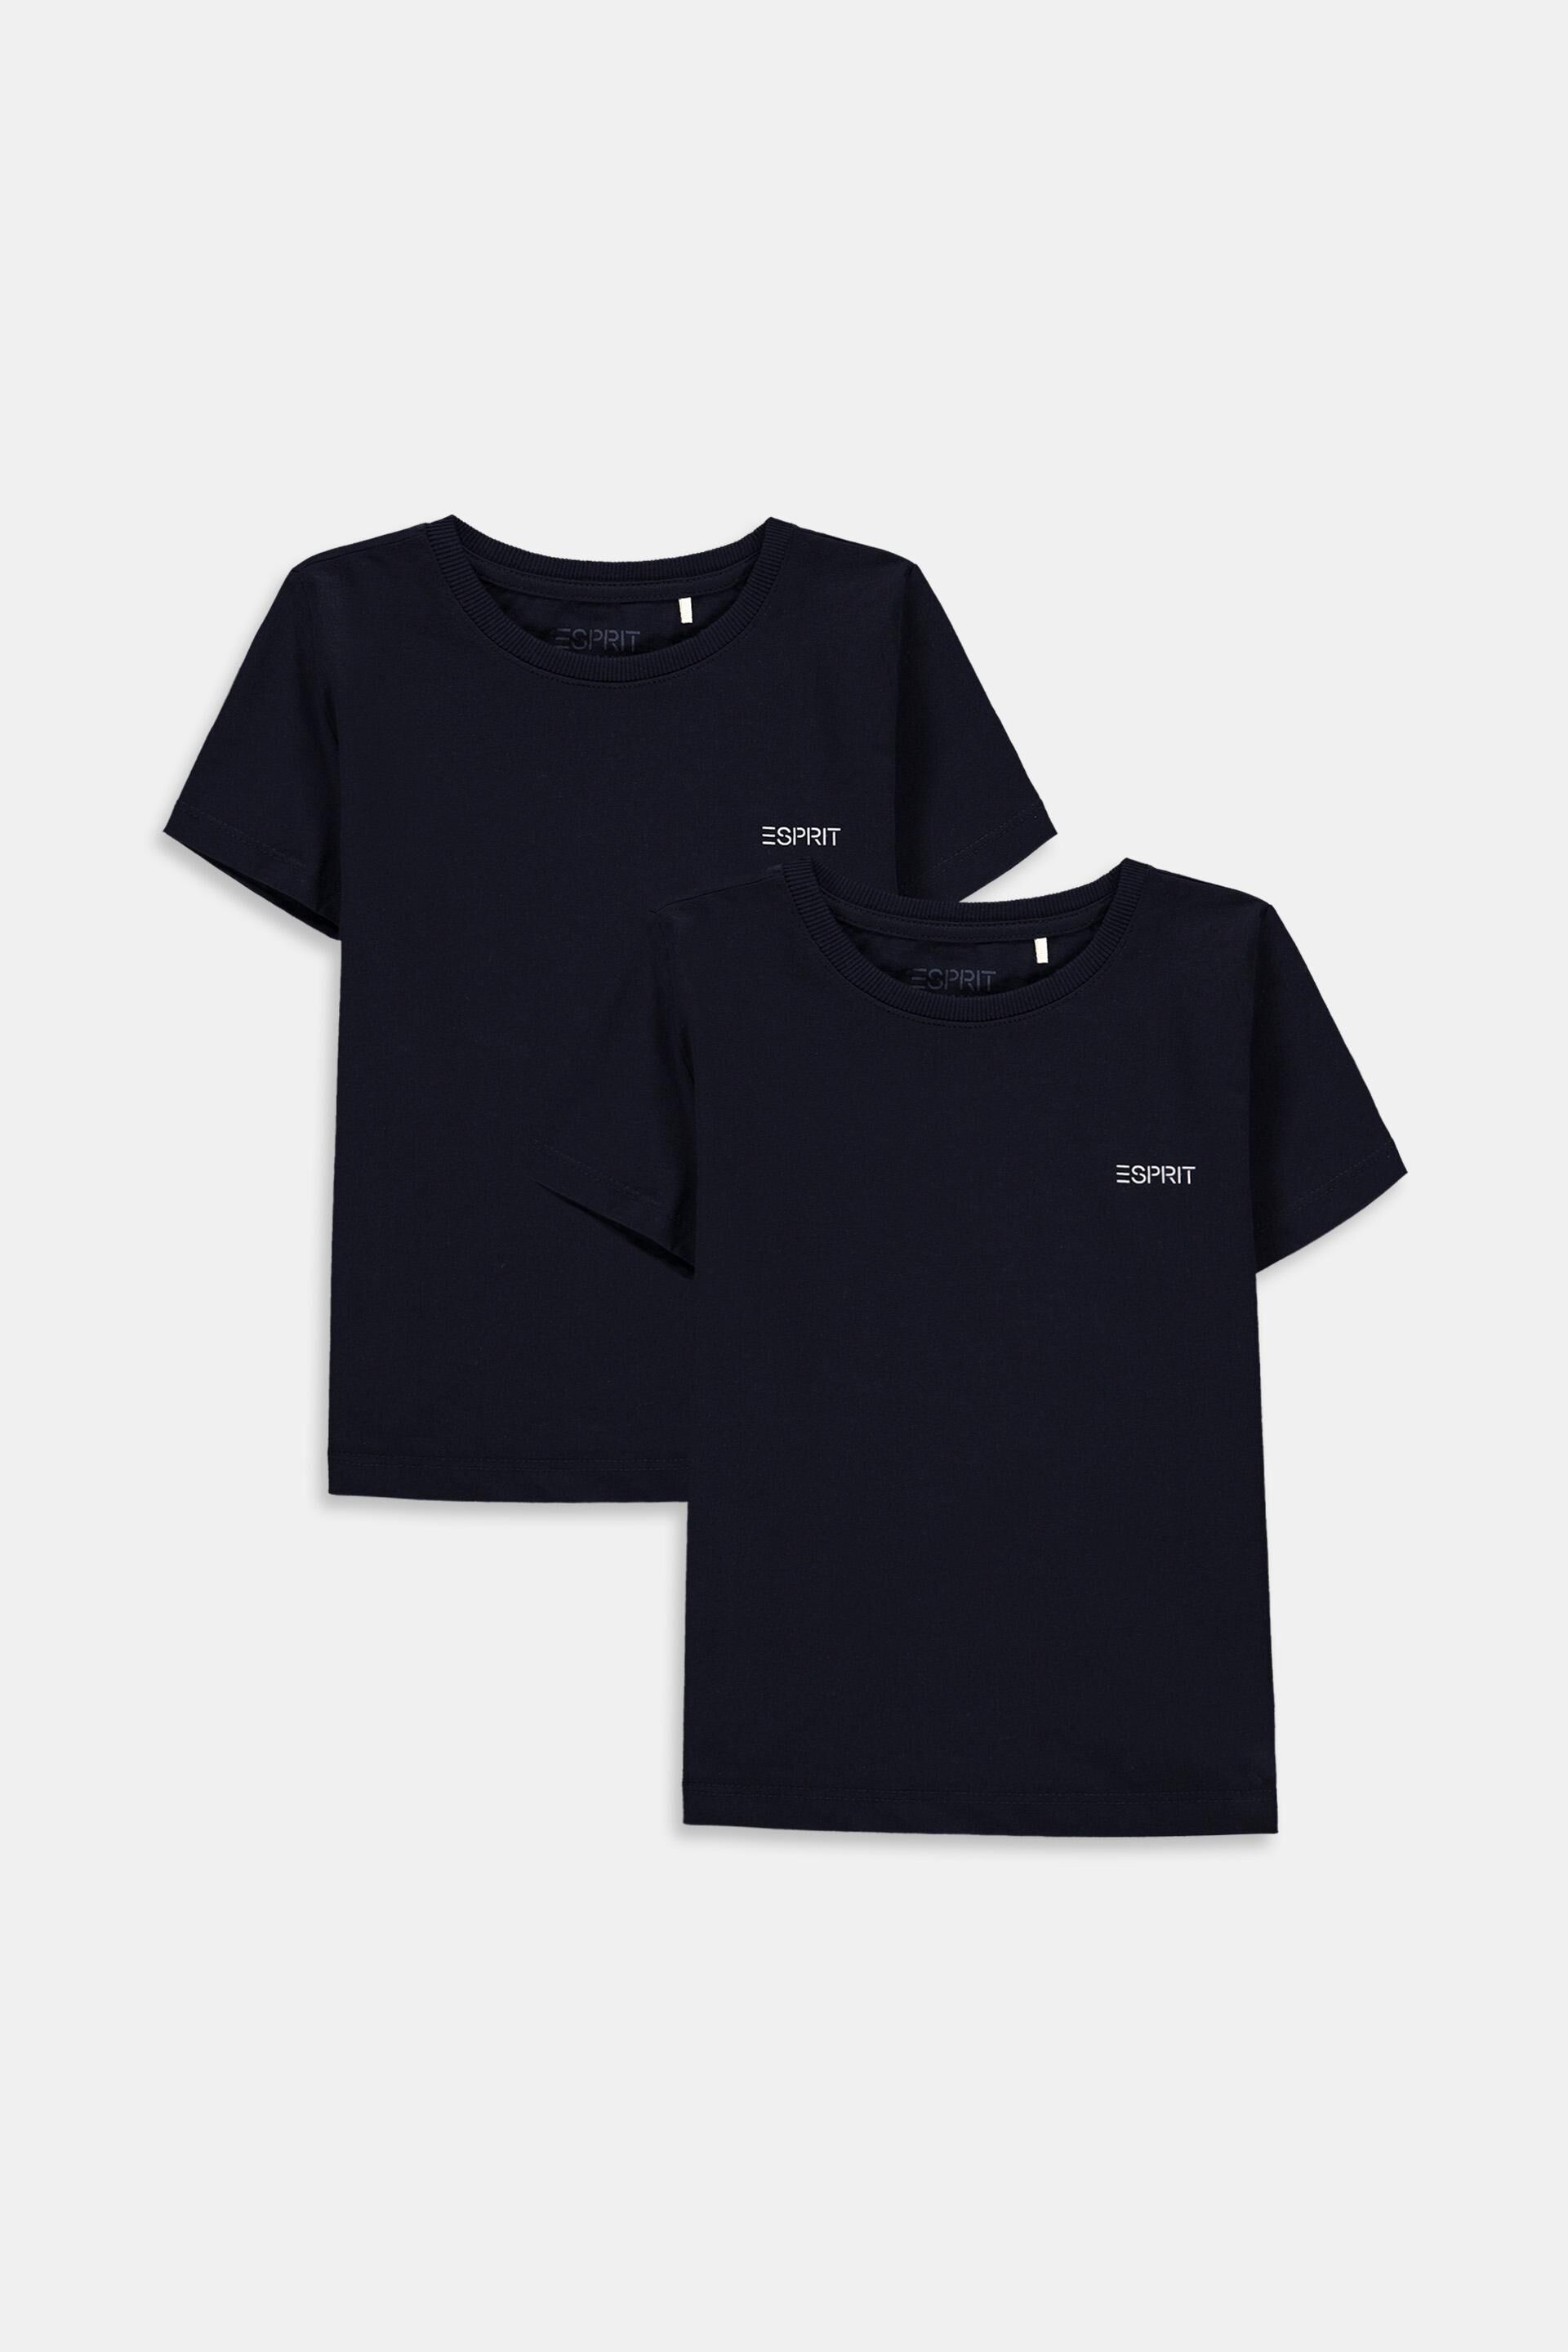 Esprit Teppich Double pack of T-shirts made of 100% cotton